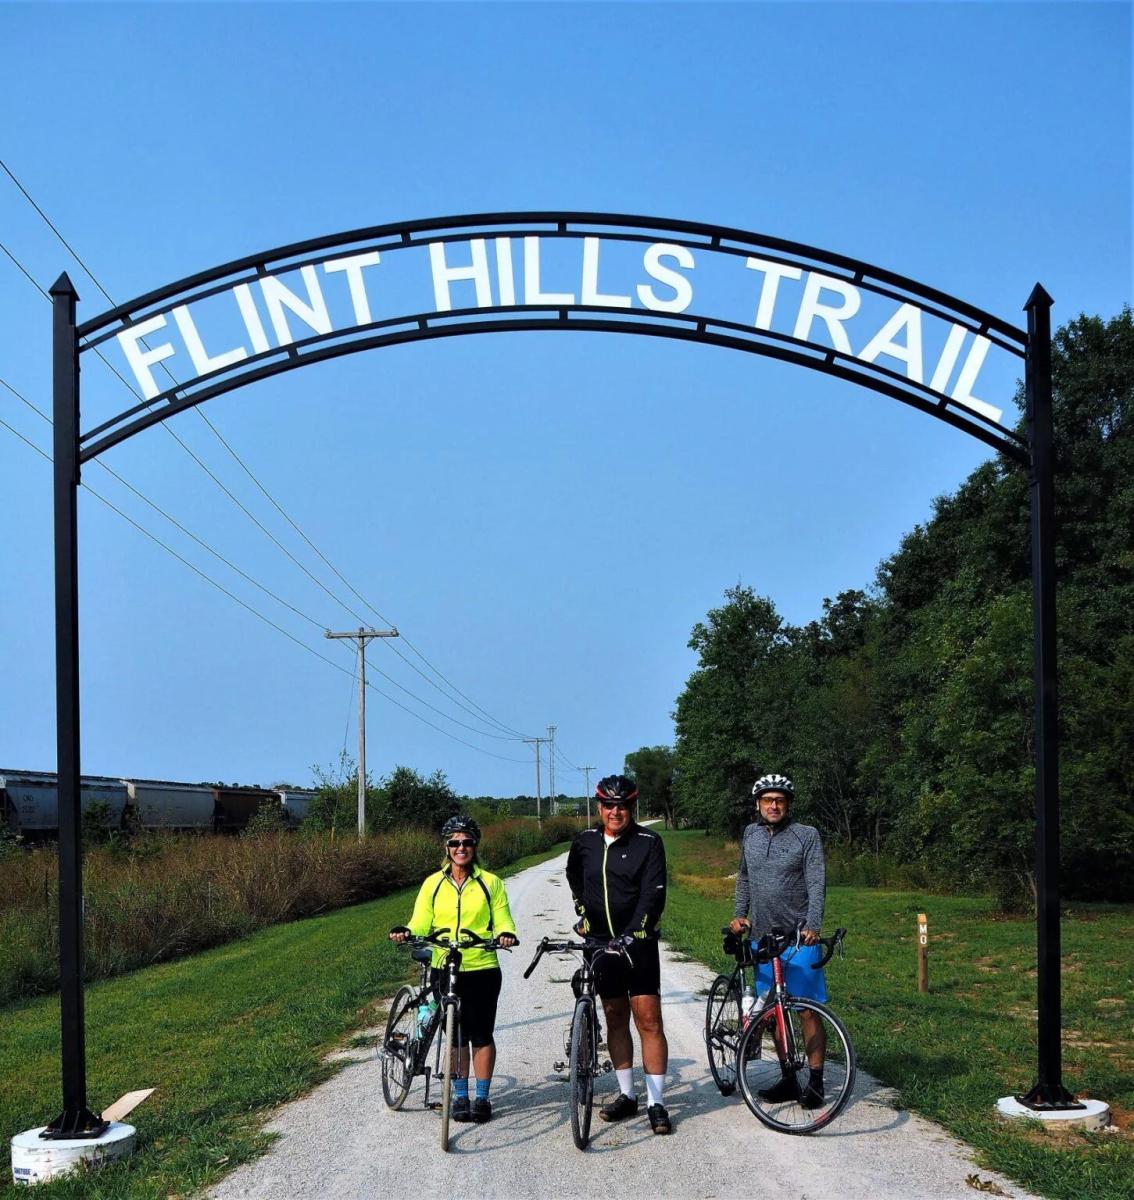  train sign with cyclists